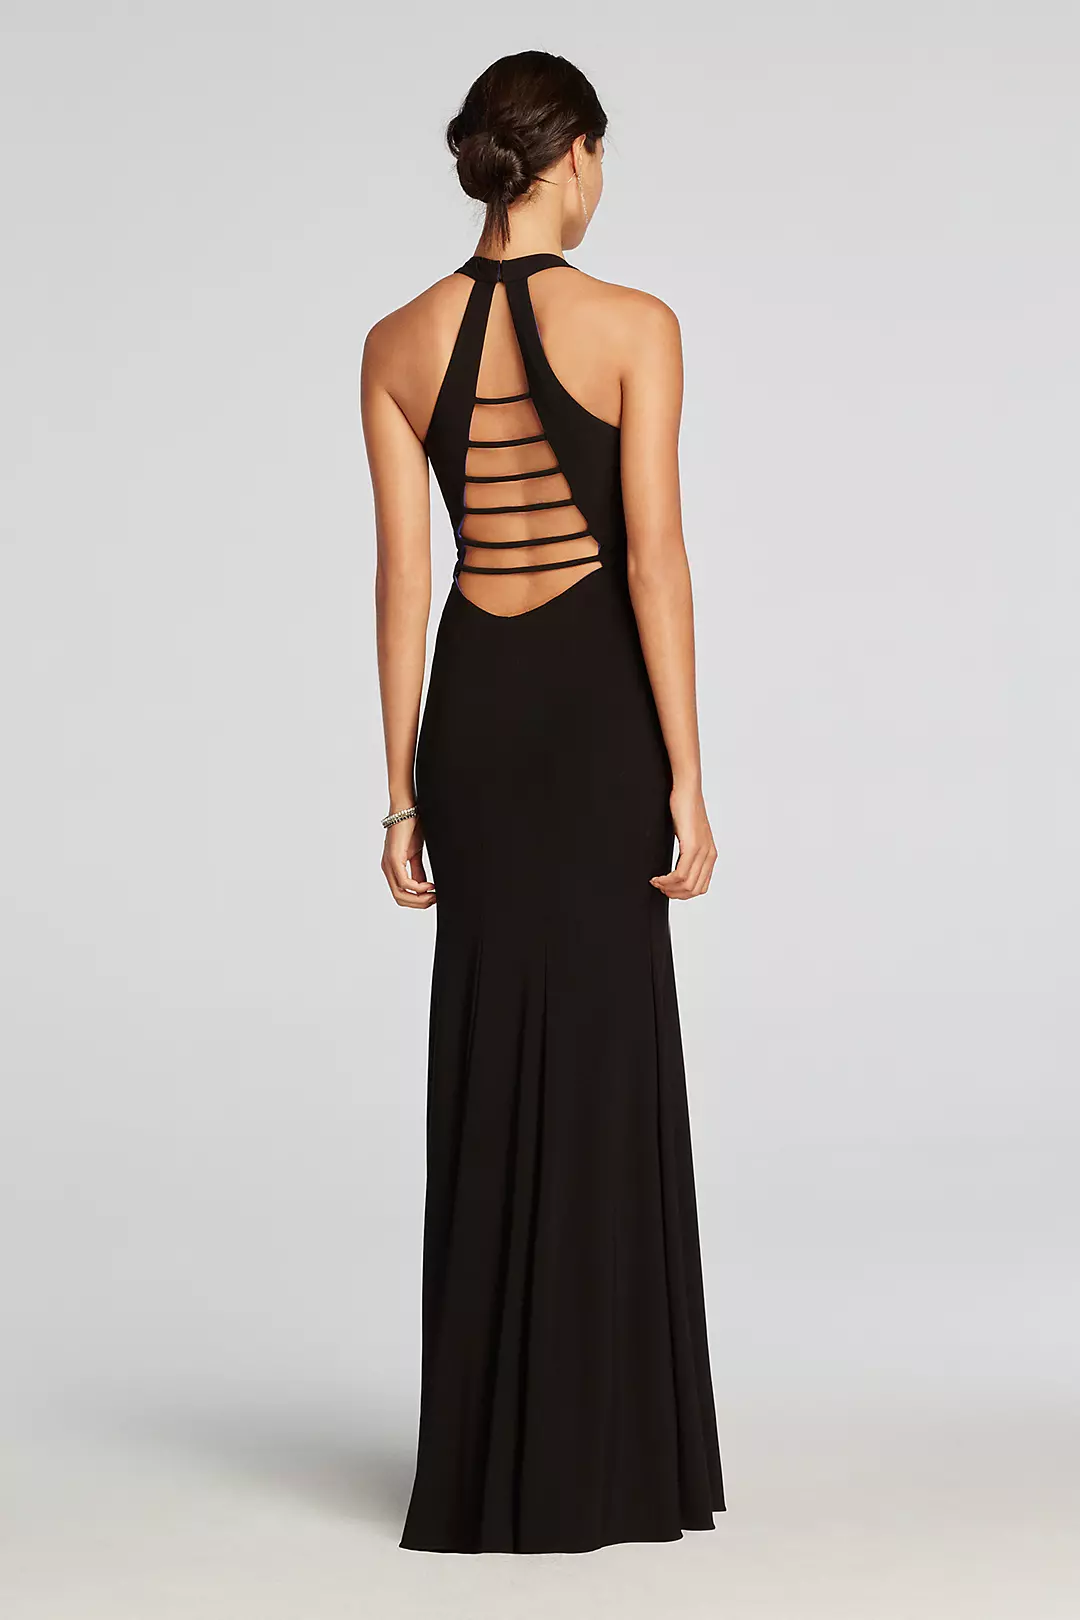 Halter Cut Out Prom Dress with Side Slit Skirt Image 2